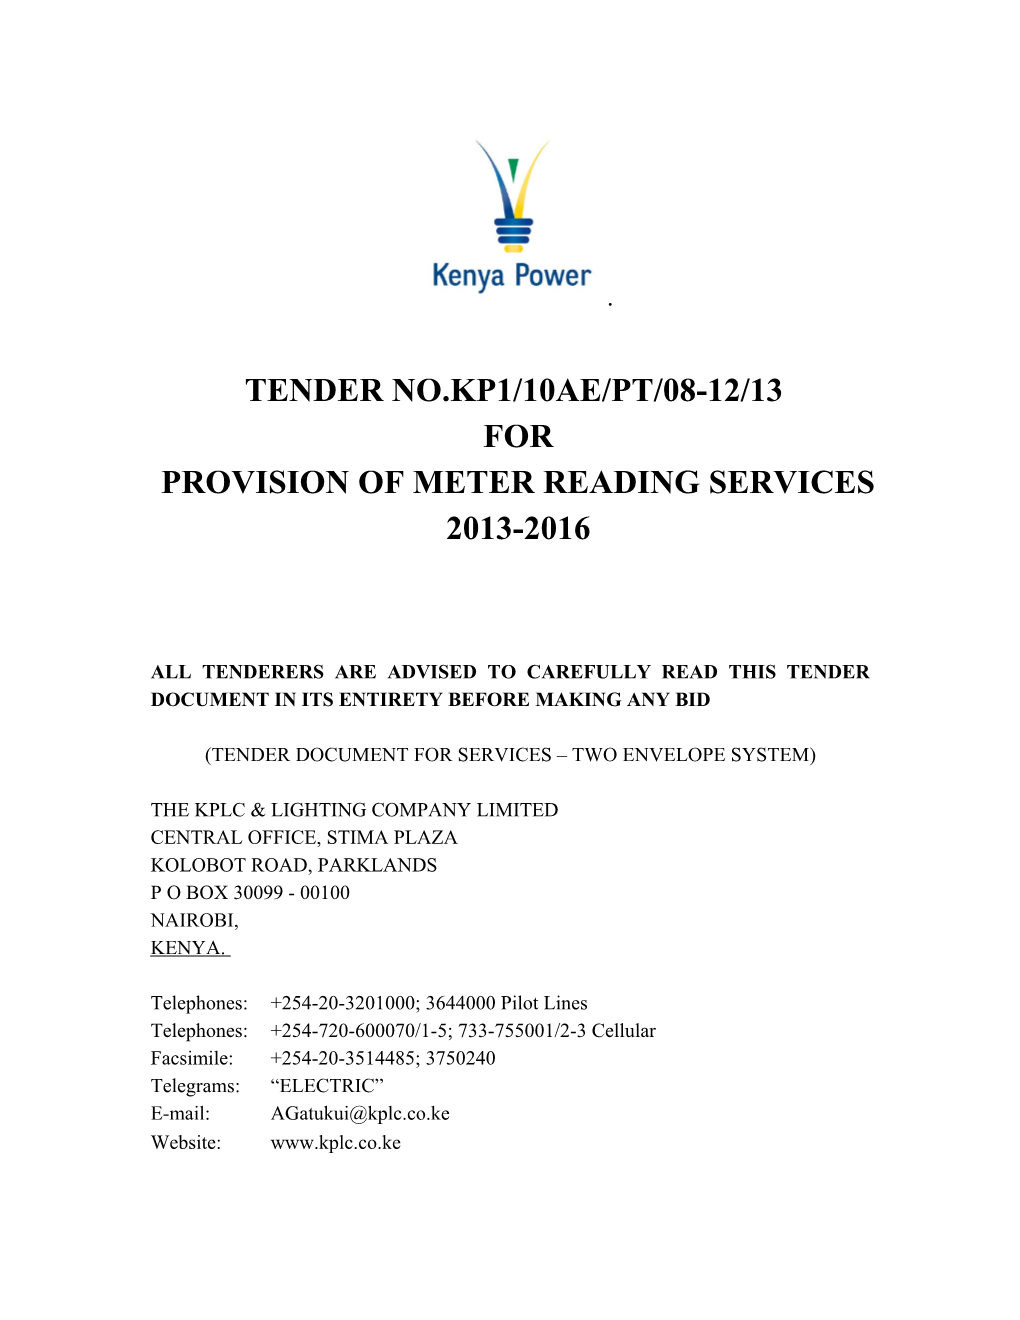 Provision of Meter Readingservices